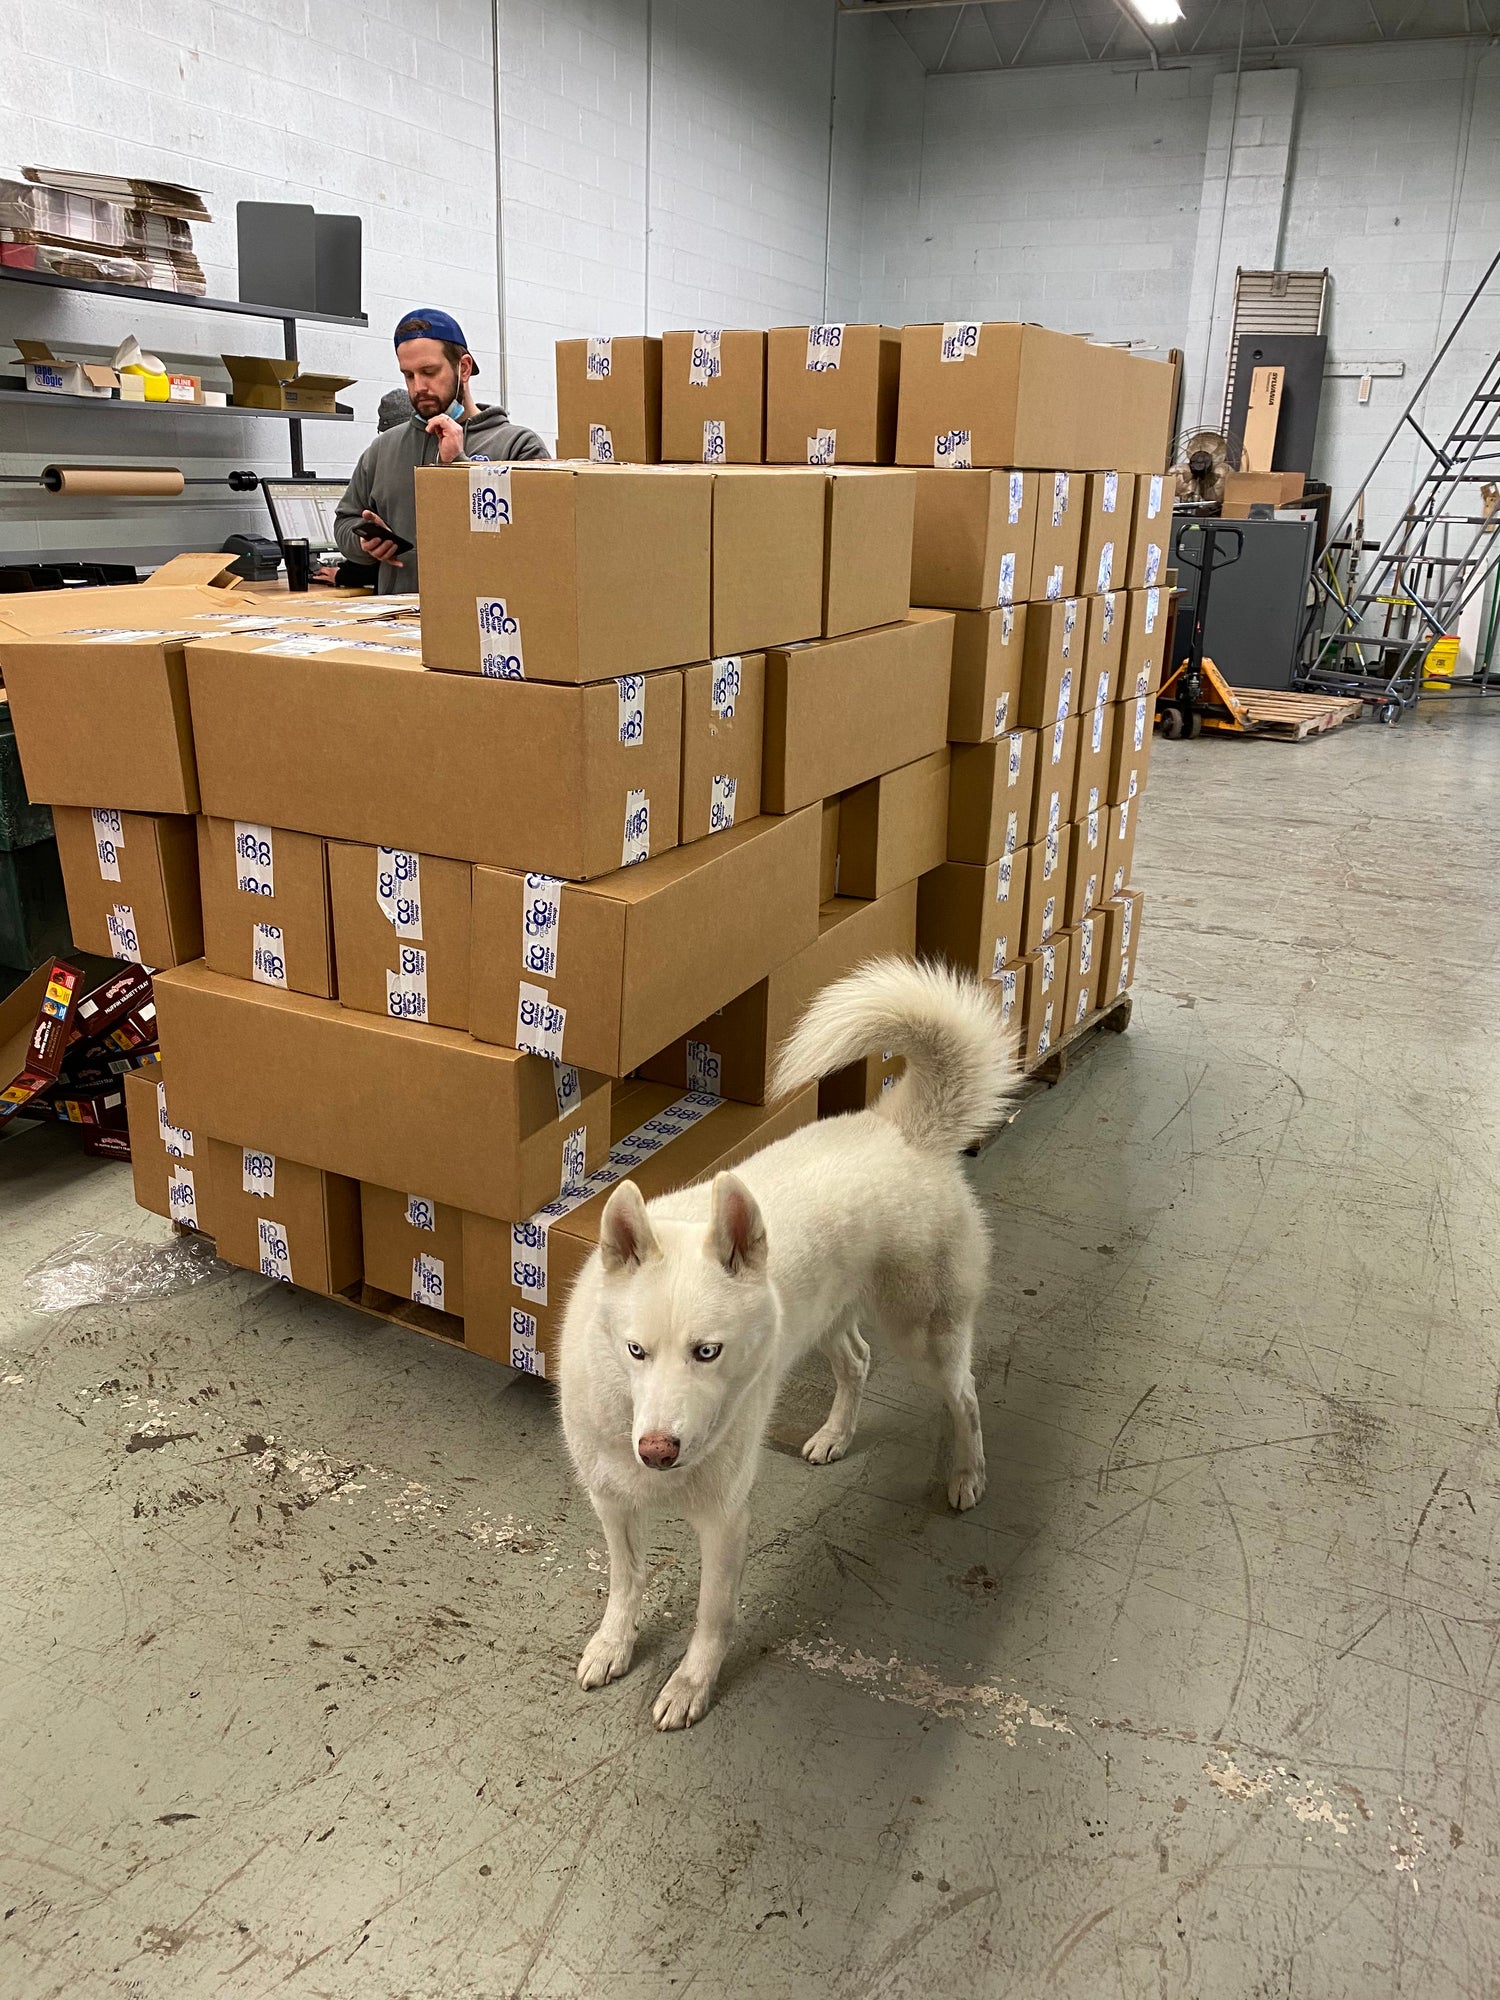 Curatives' Hopsin the Husky Dog inspects shipments in the warehouse.